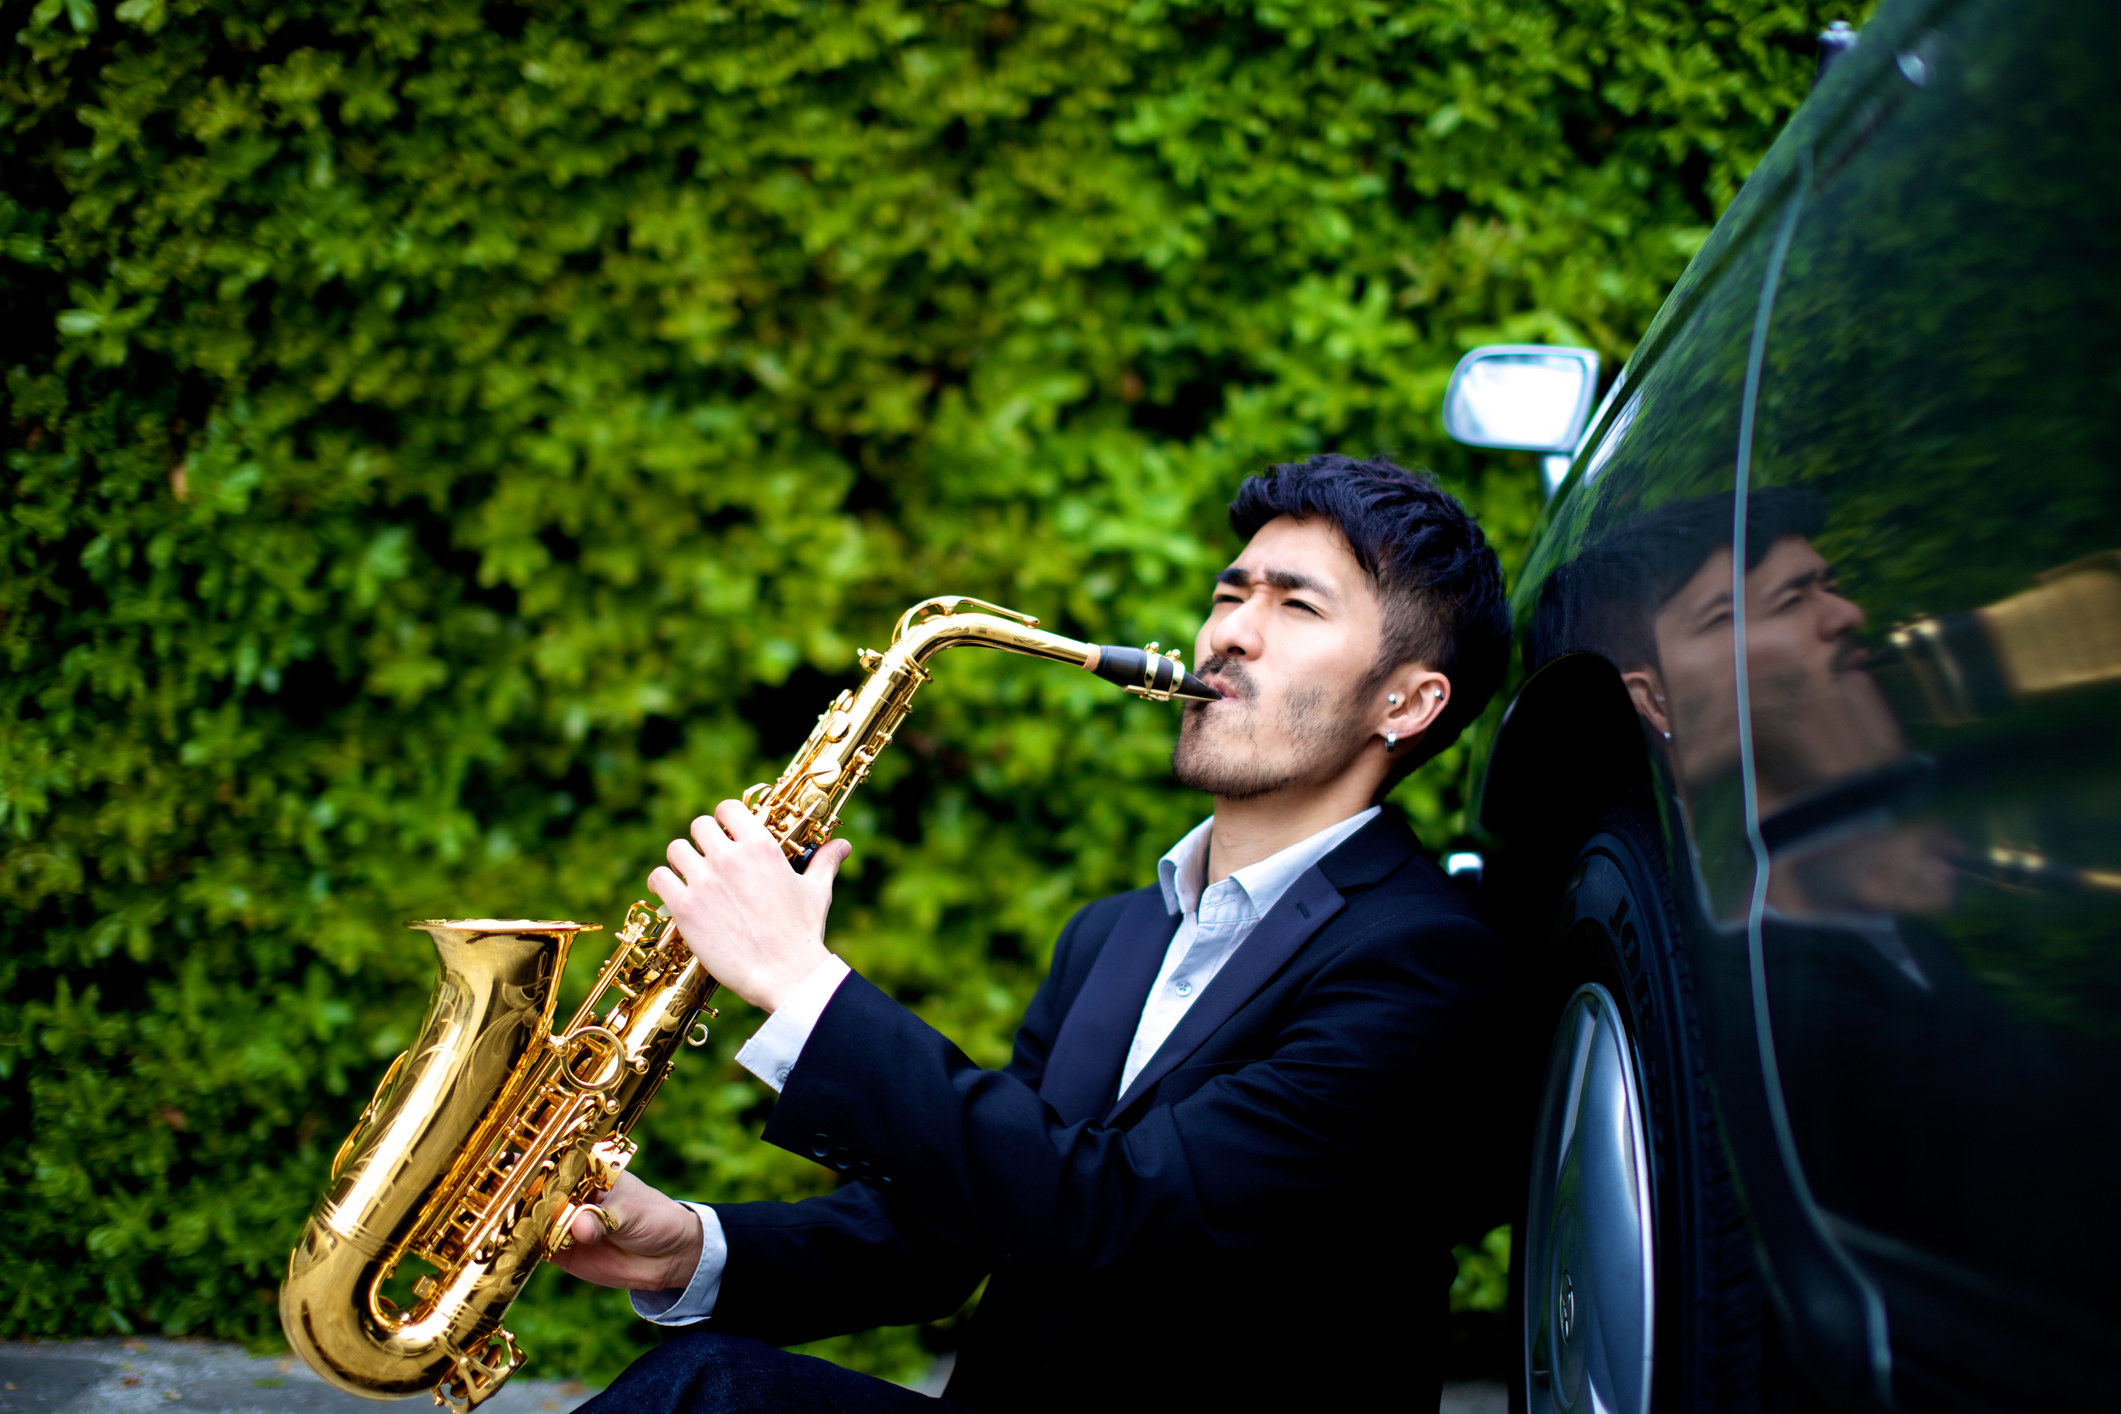 Man playing the saxophone next to a car